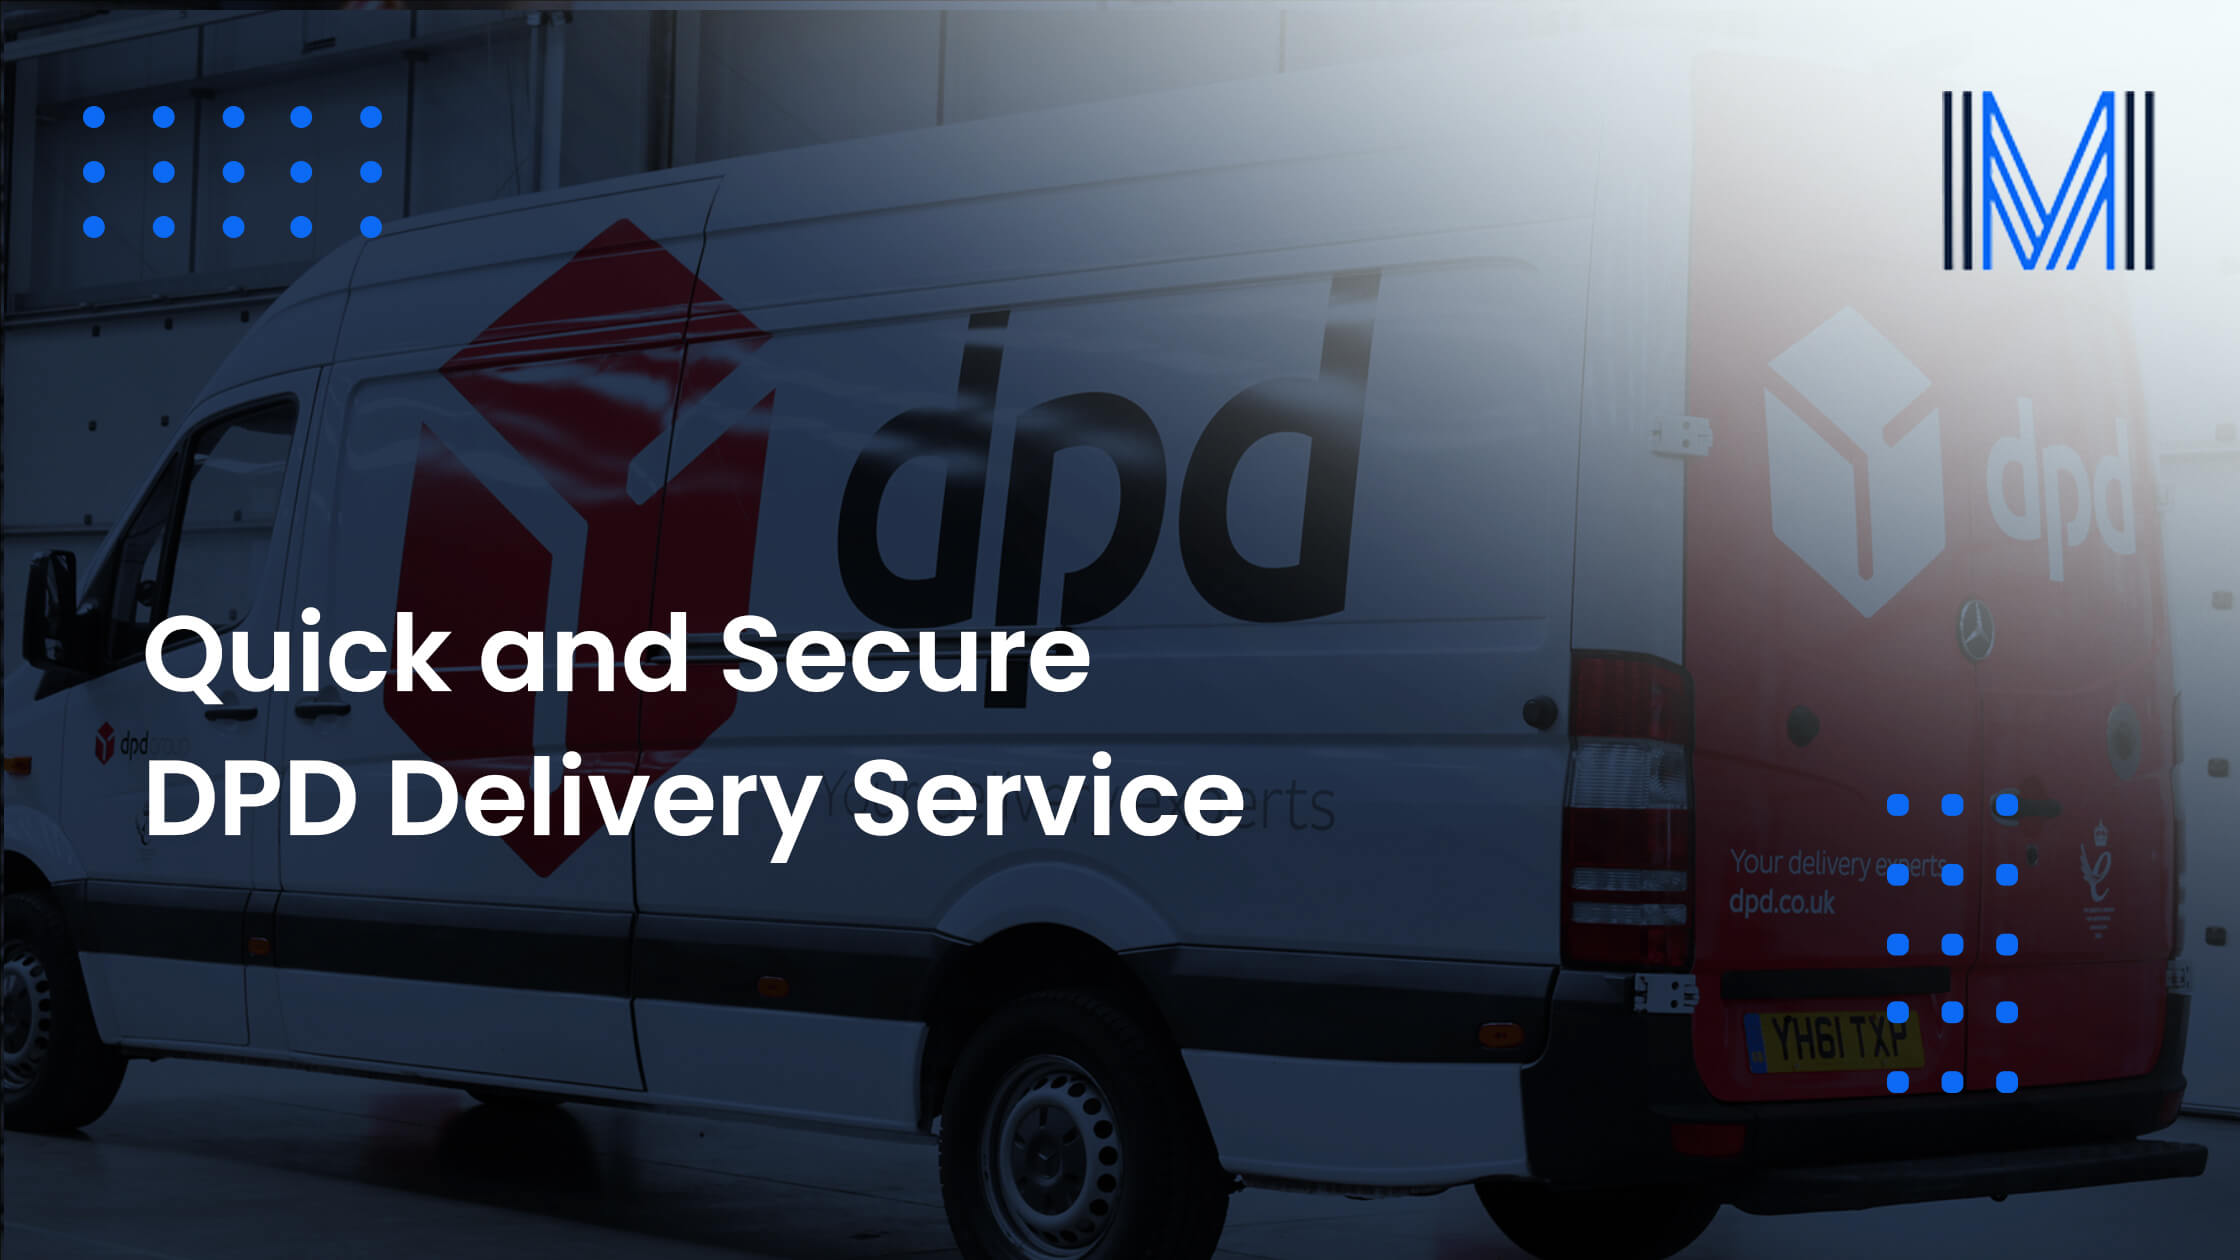 Quick and Secure DPD Delivery Service